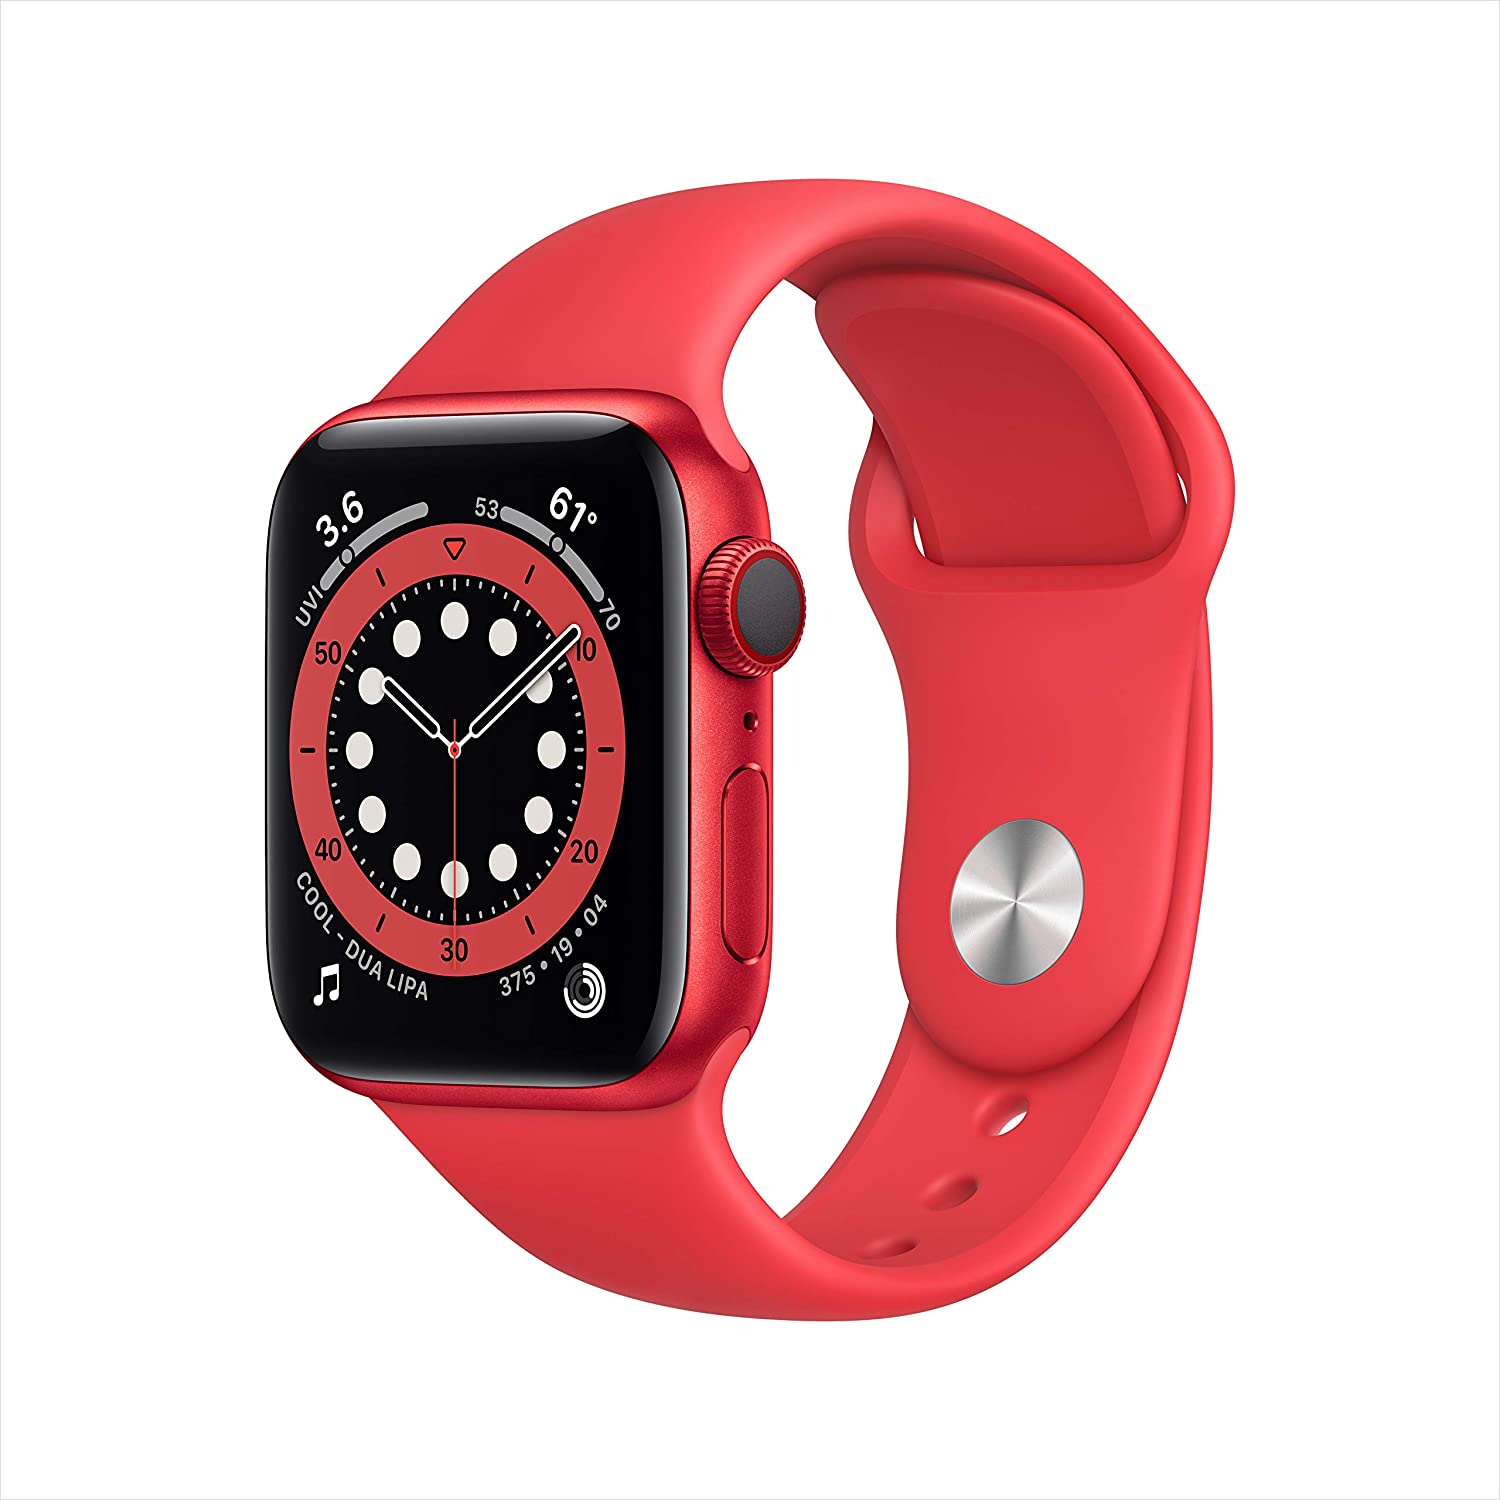 Apple Watch Series 6 Red Cellular